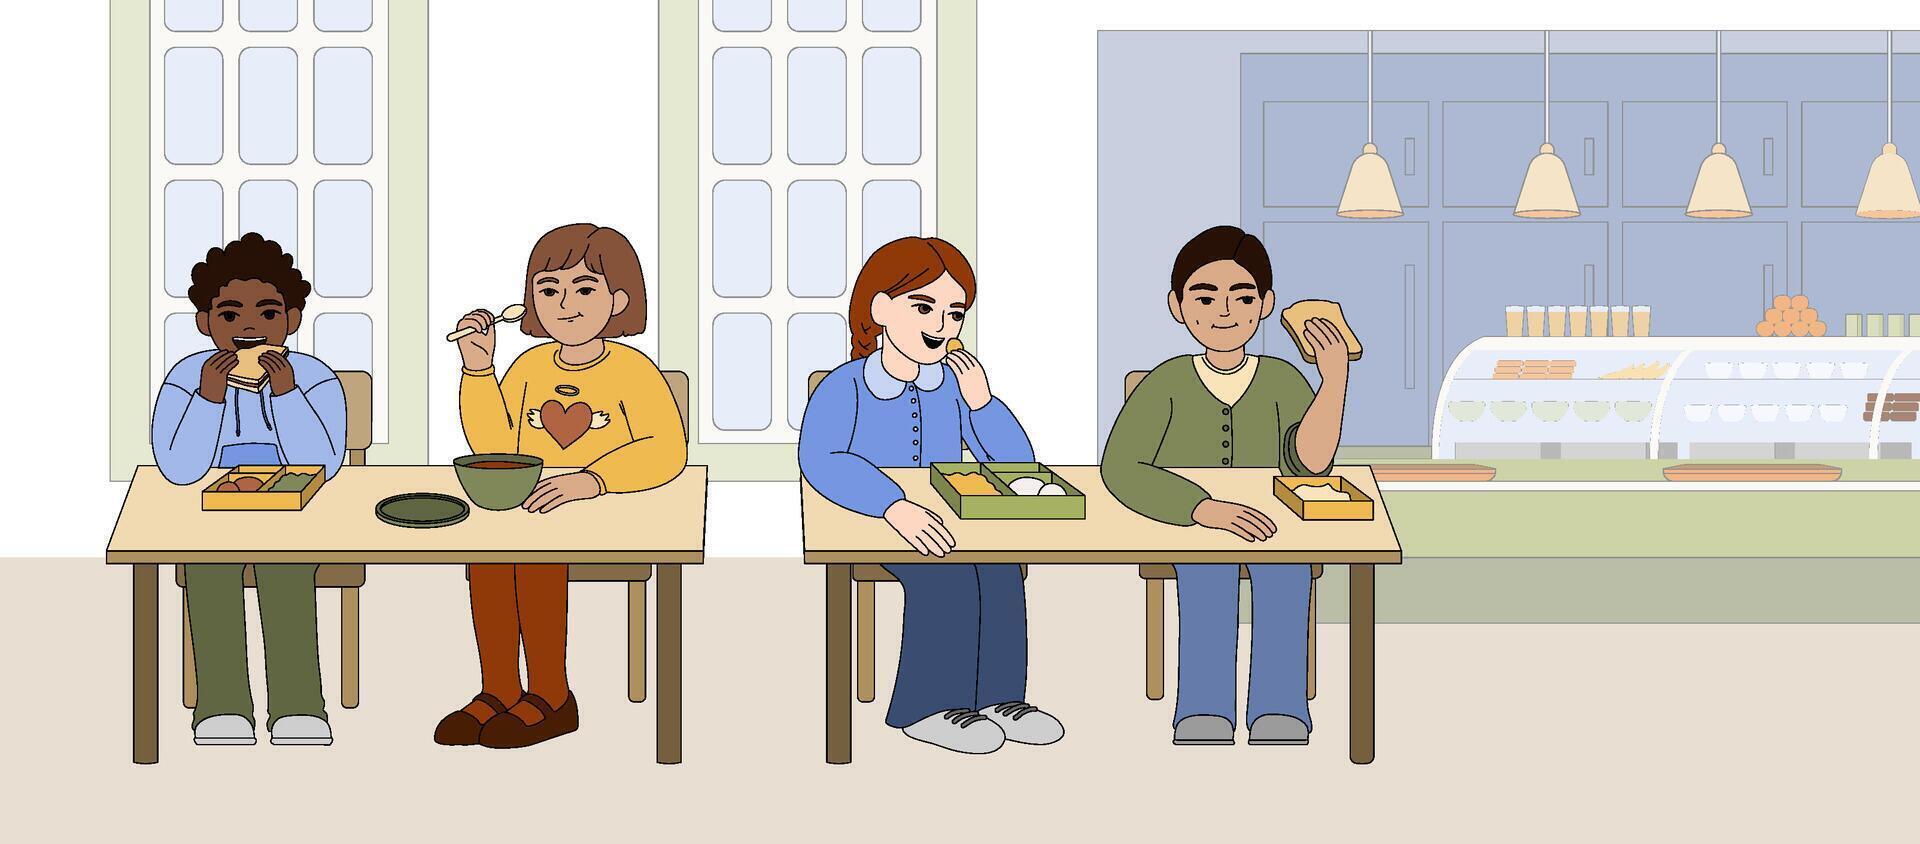 Flat children eat food in school canteen. Happy multiracial kids sitting at table and eating sandwiches from container boxes. Cafeteria interior with chairs, tables and counter bar. vector